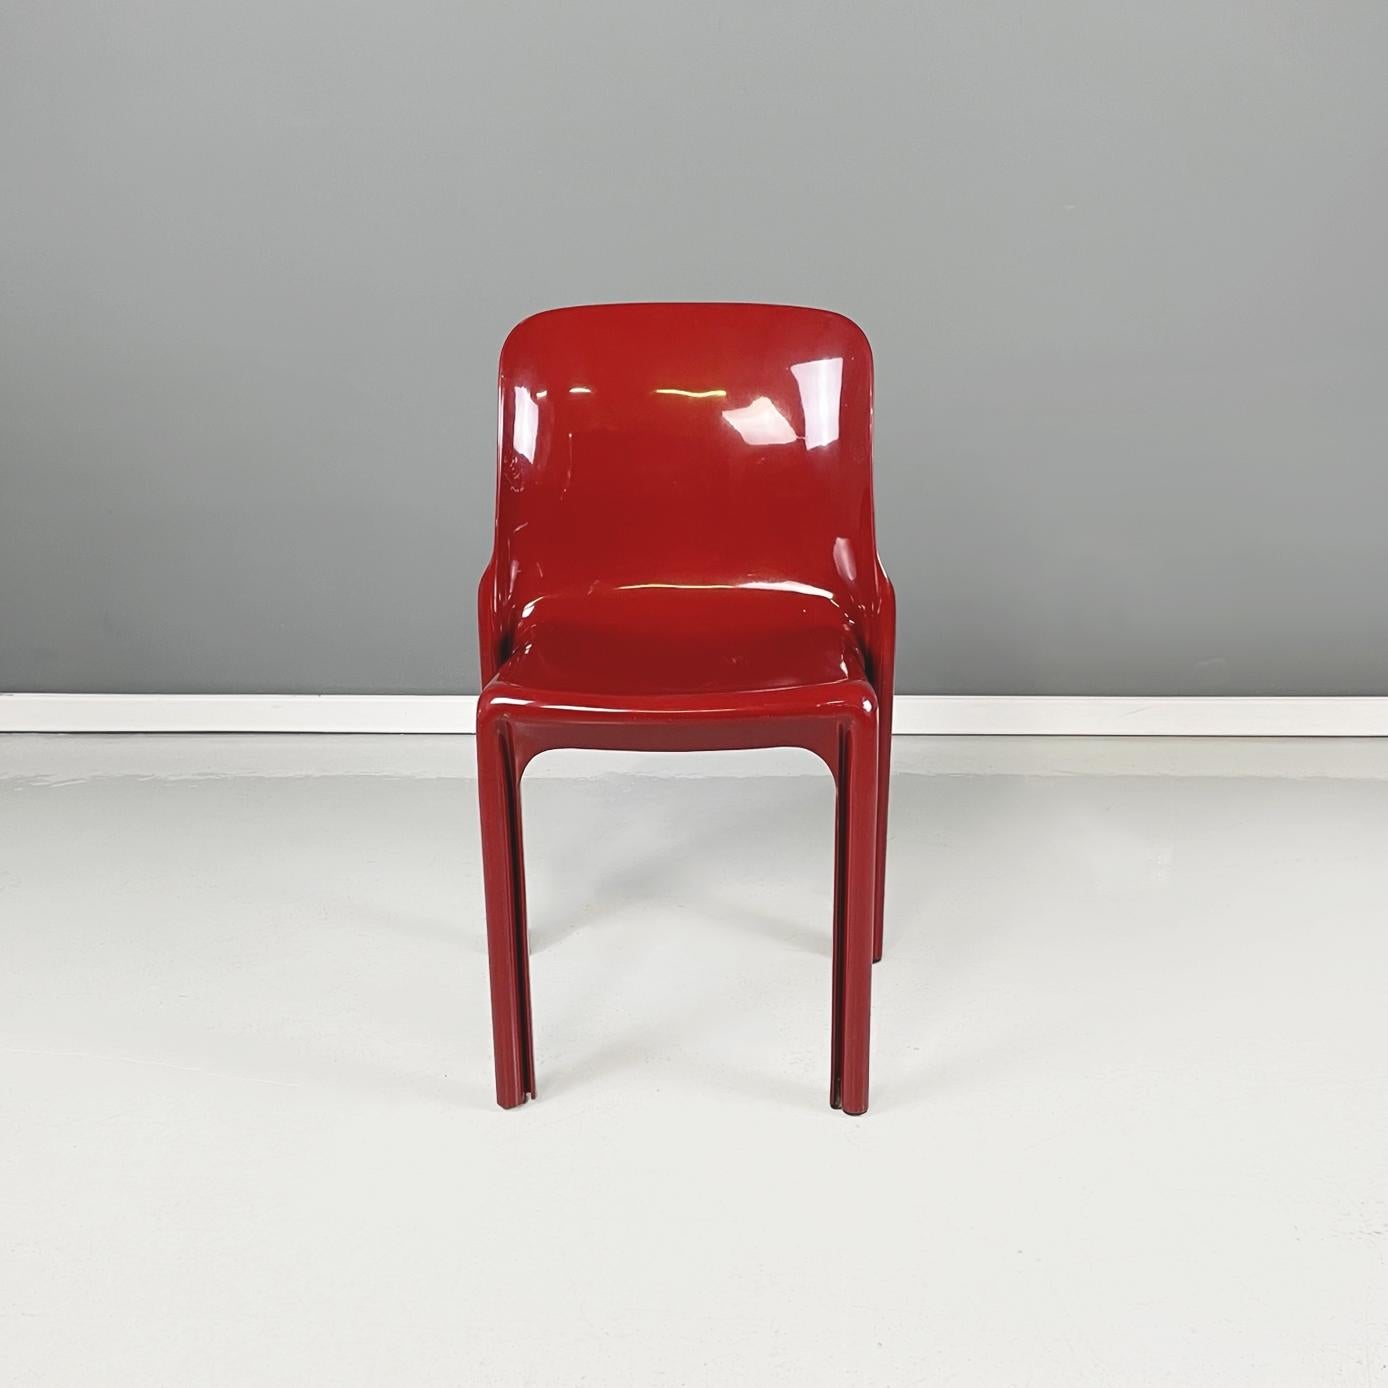 Italian modern plastic red Chairs mod. Selene by Vico Magistretti for Artemide, 1960s
Set of 4 iconic chairs mod. Selene in dark red-burgundy plastic with square seat. The structure is monocoque with S-shaped grooves along the legs.